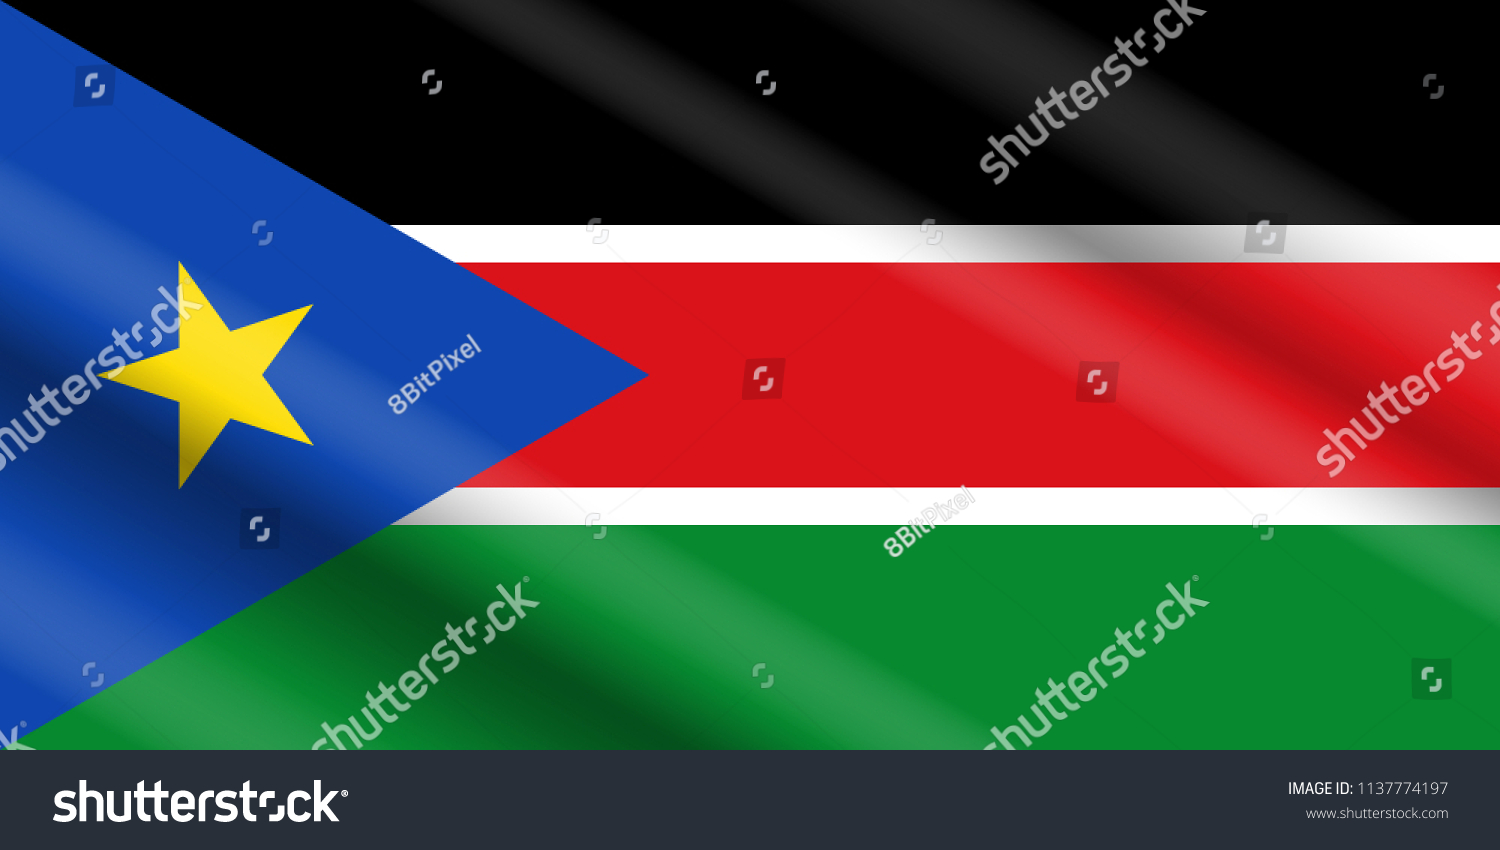 Flag of South Sudan in Real Proportion with Switchable Wavelike Gradient #1137774197